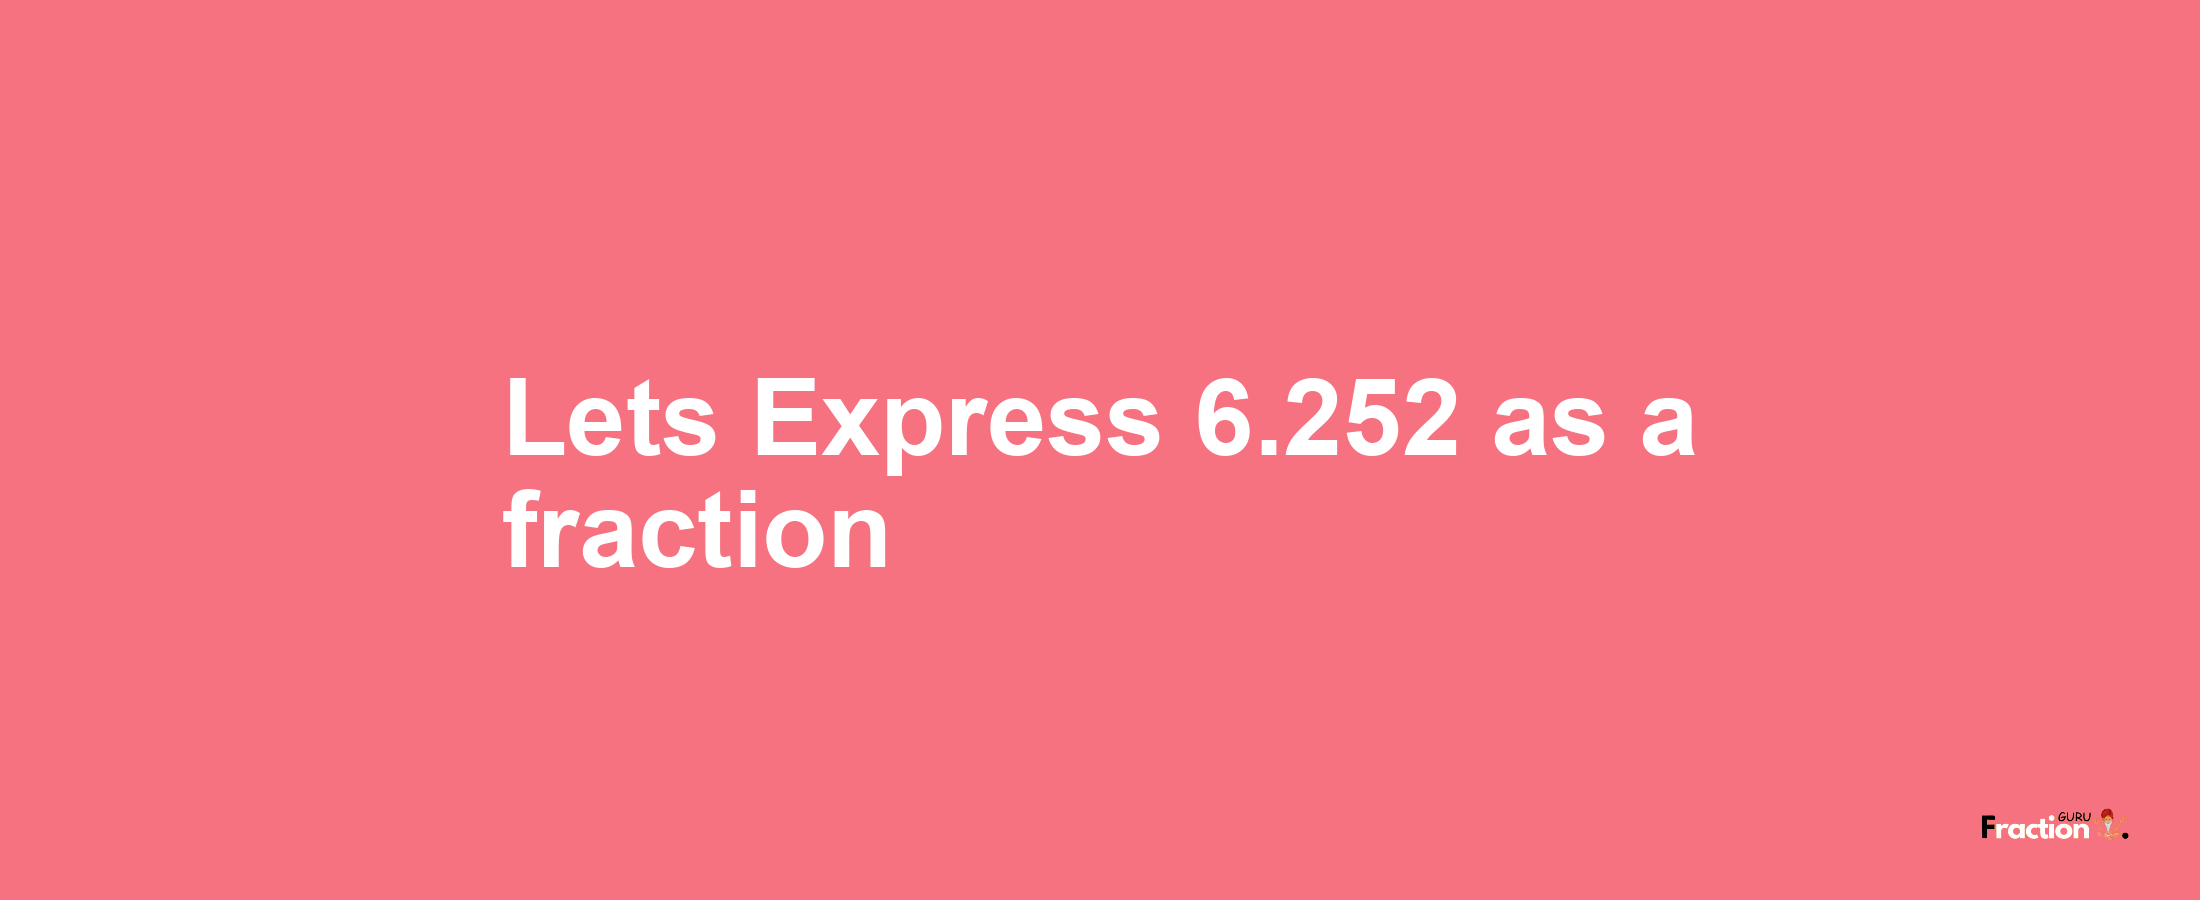 Lets Express 6.252 as afraction